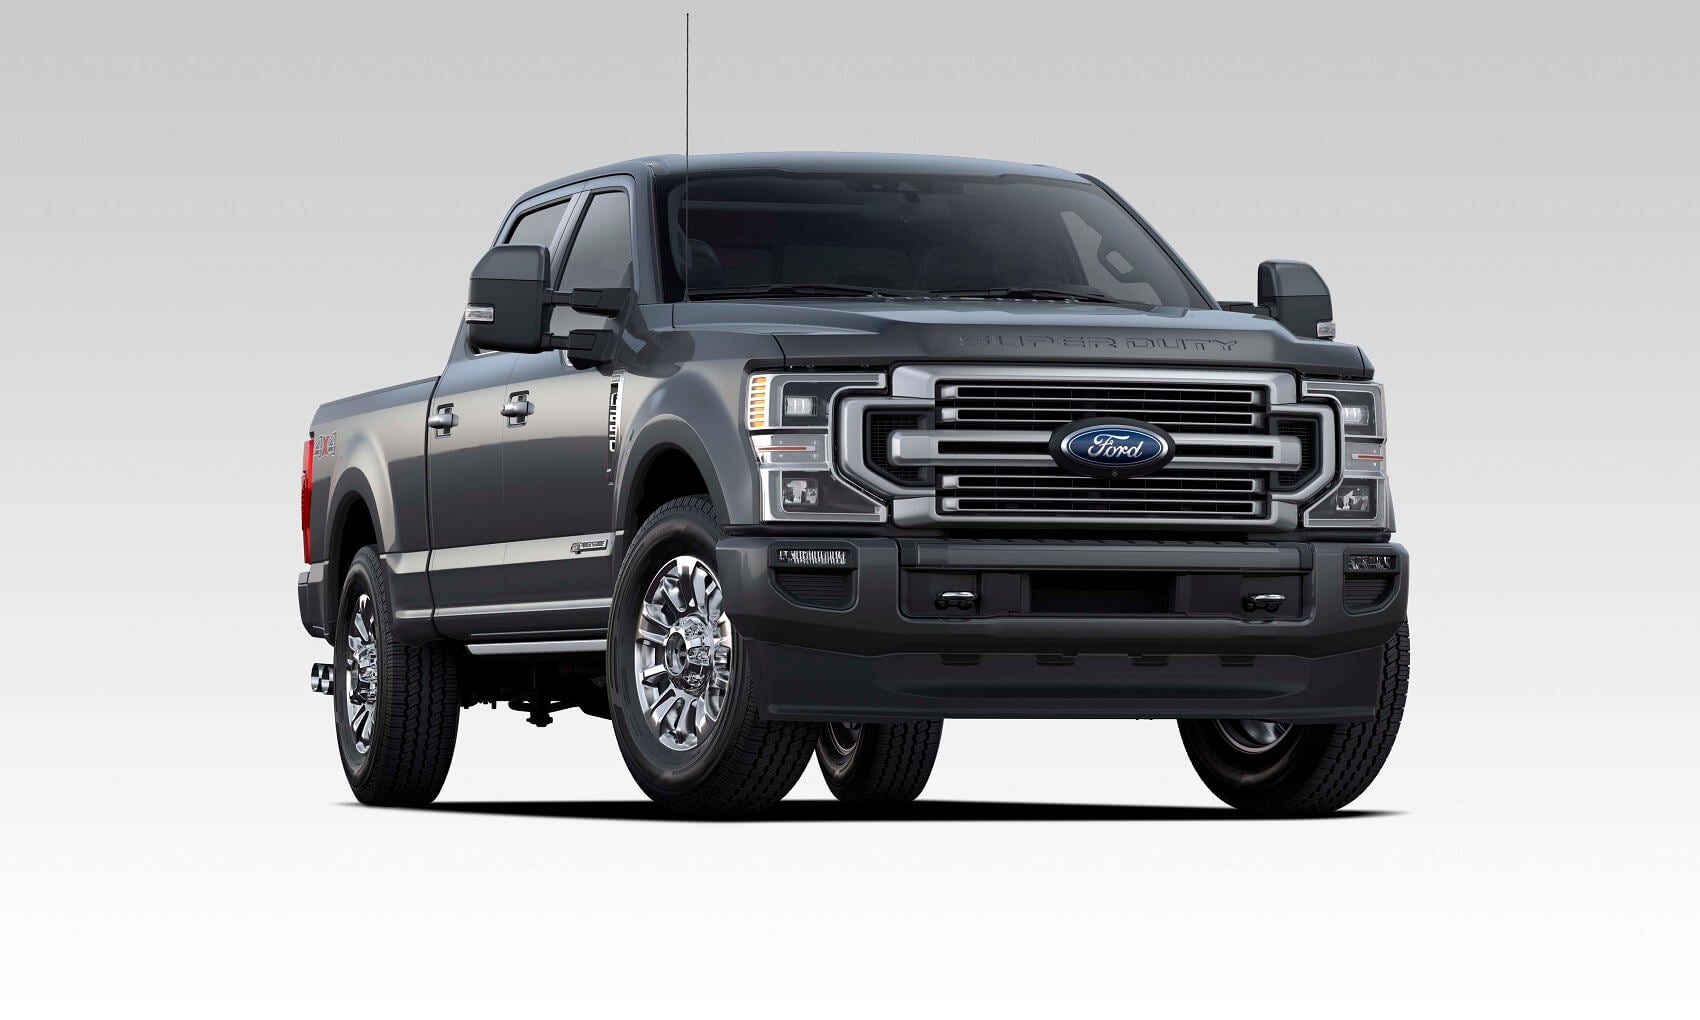 A new grey 2021 Ford Super Duty F-250 against a grey and white gradient background.